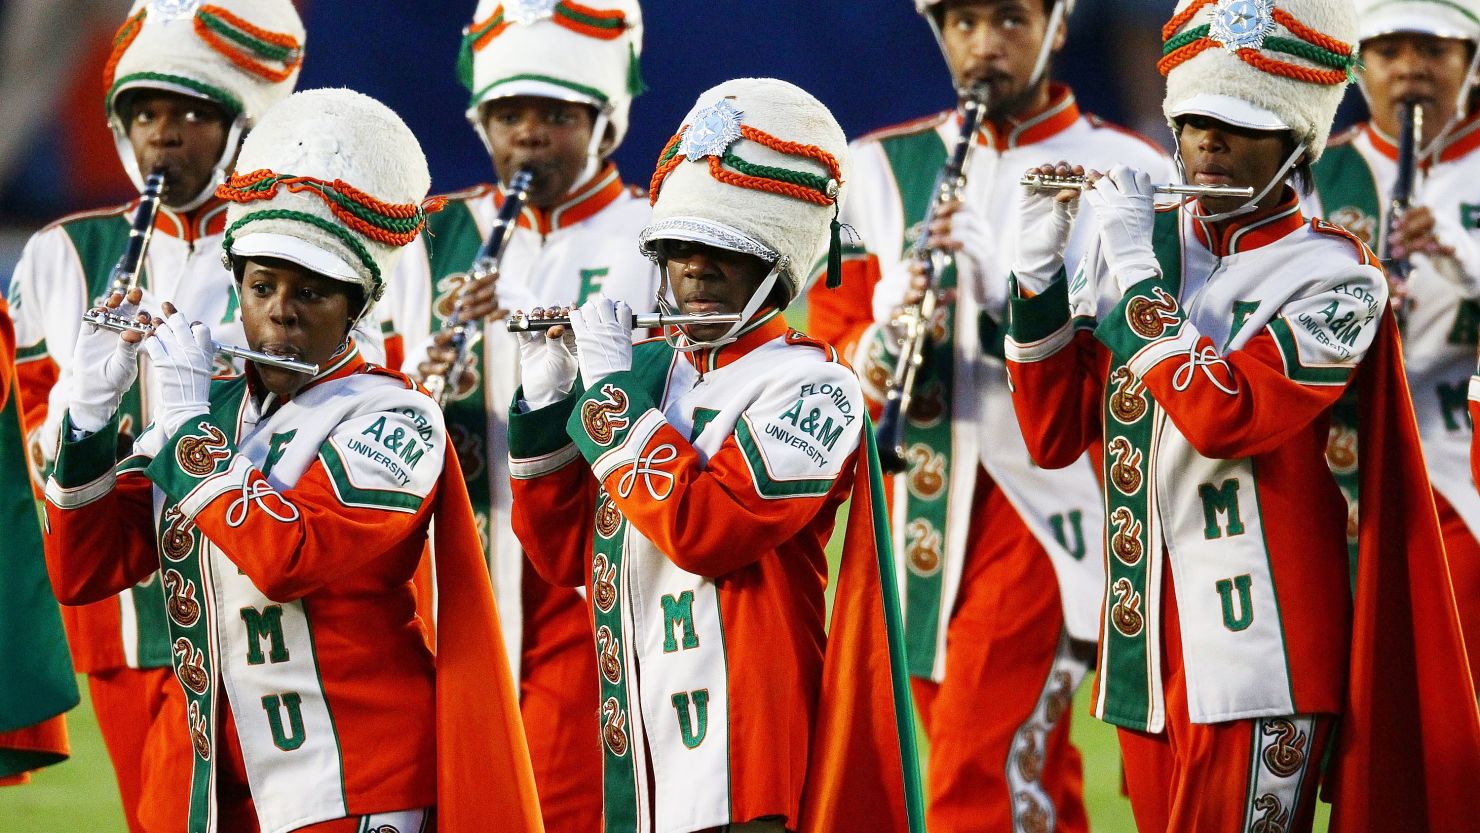 A new allegation of hazing in connection with Florida A&M's Marching 100 band has arisen.